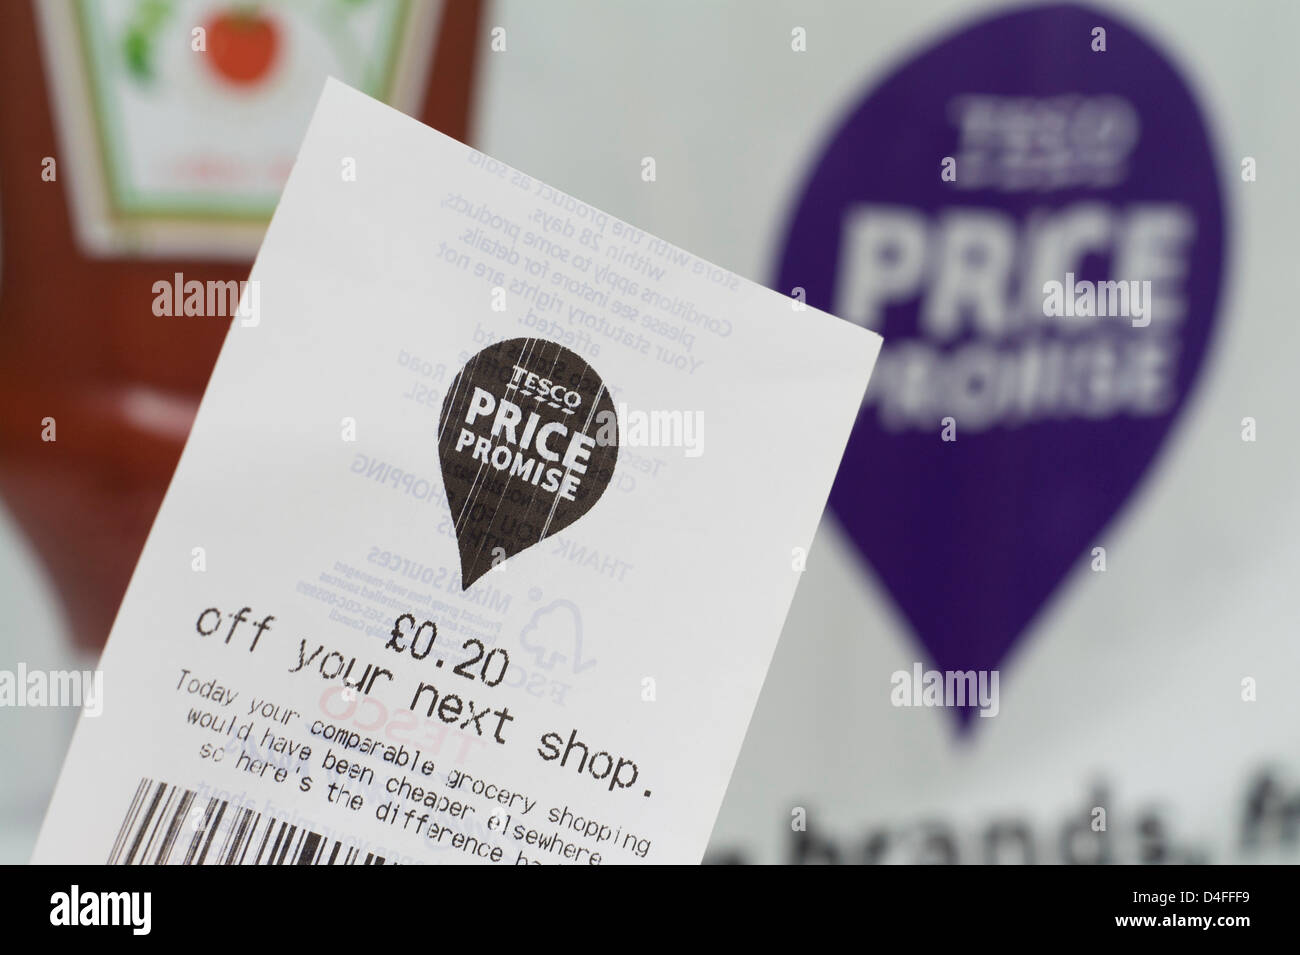 Tesco price promise comparable money off shopping coupon Stock Photo